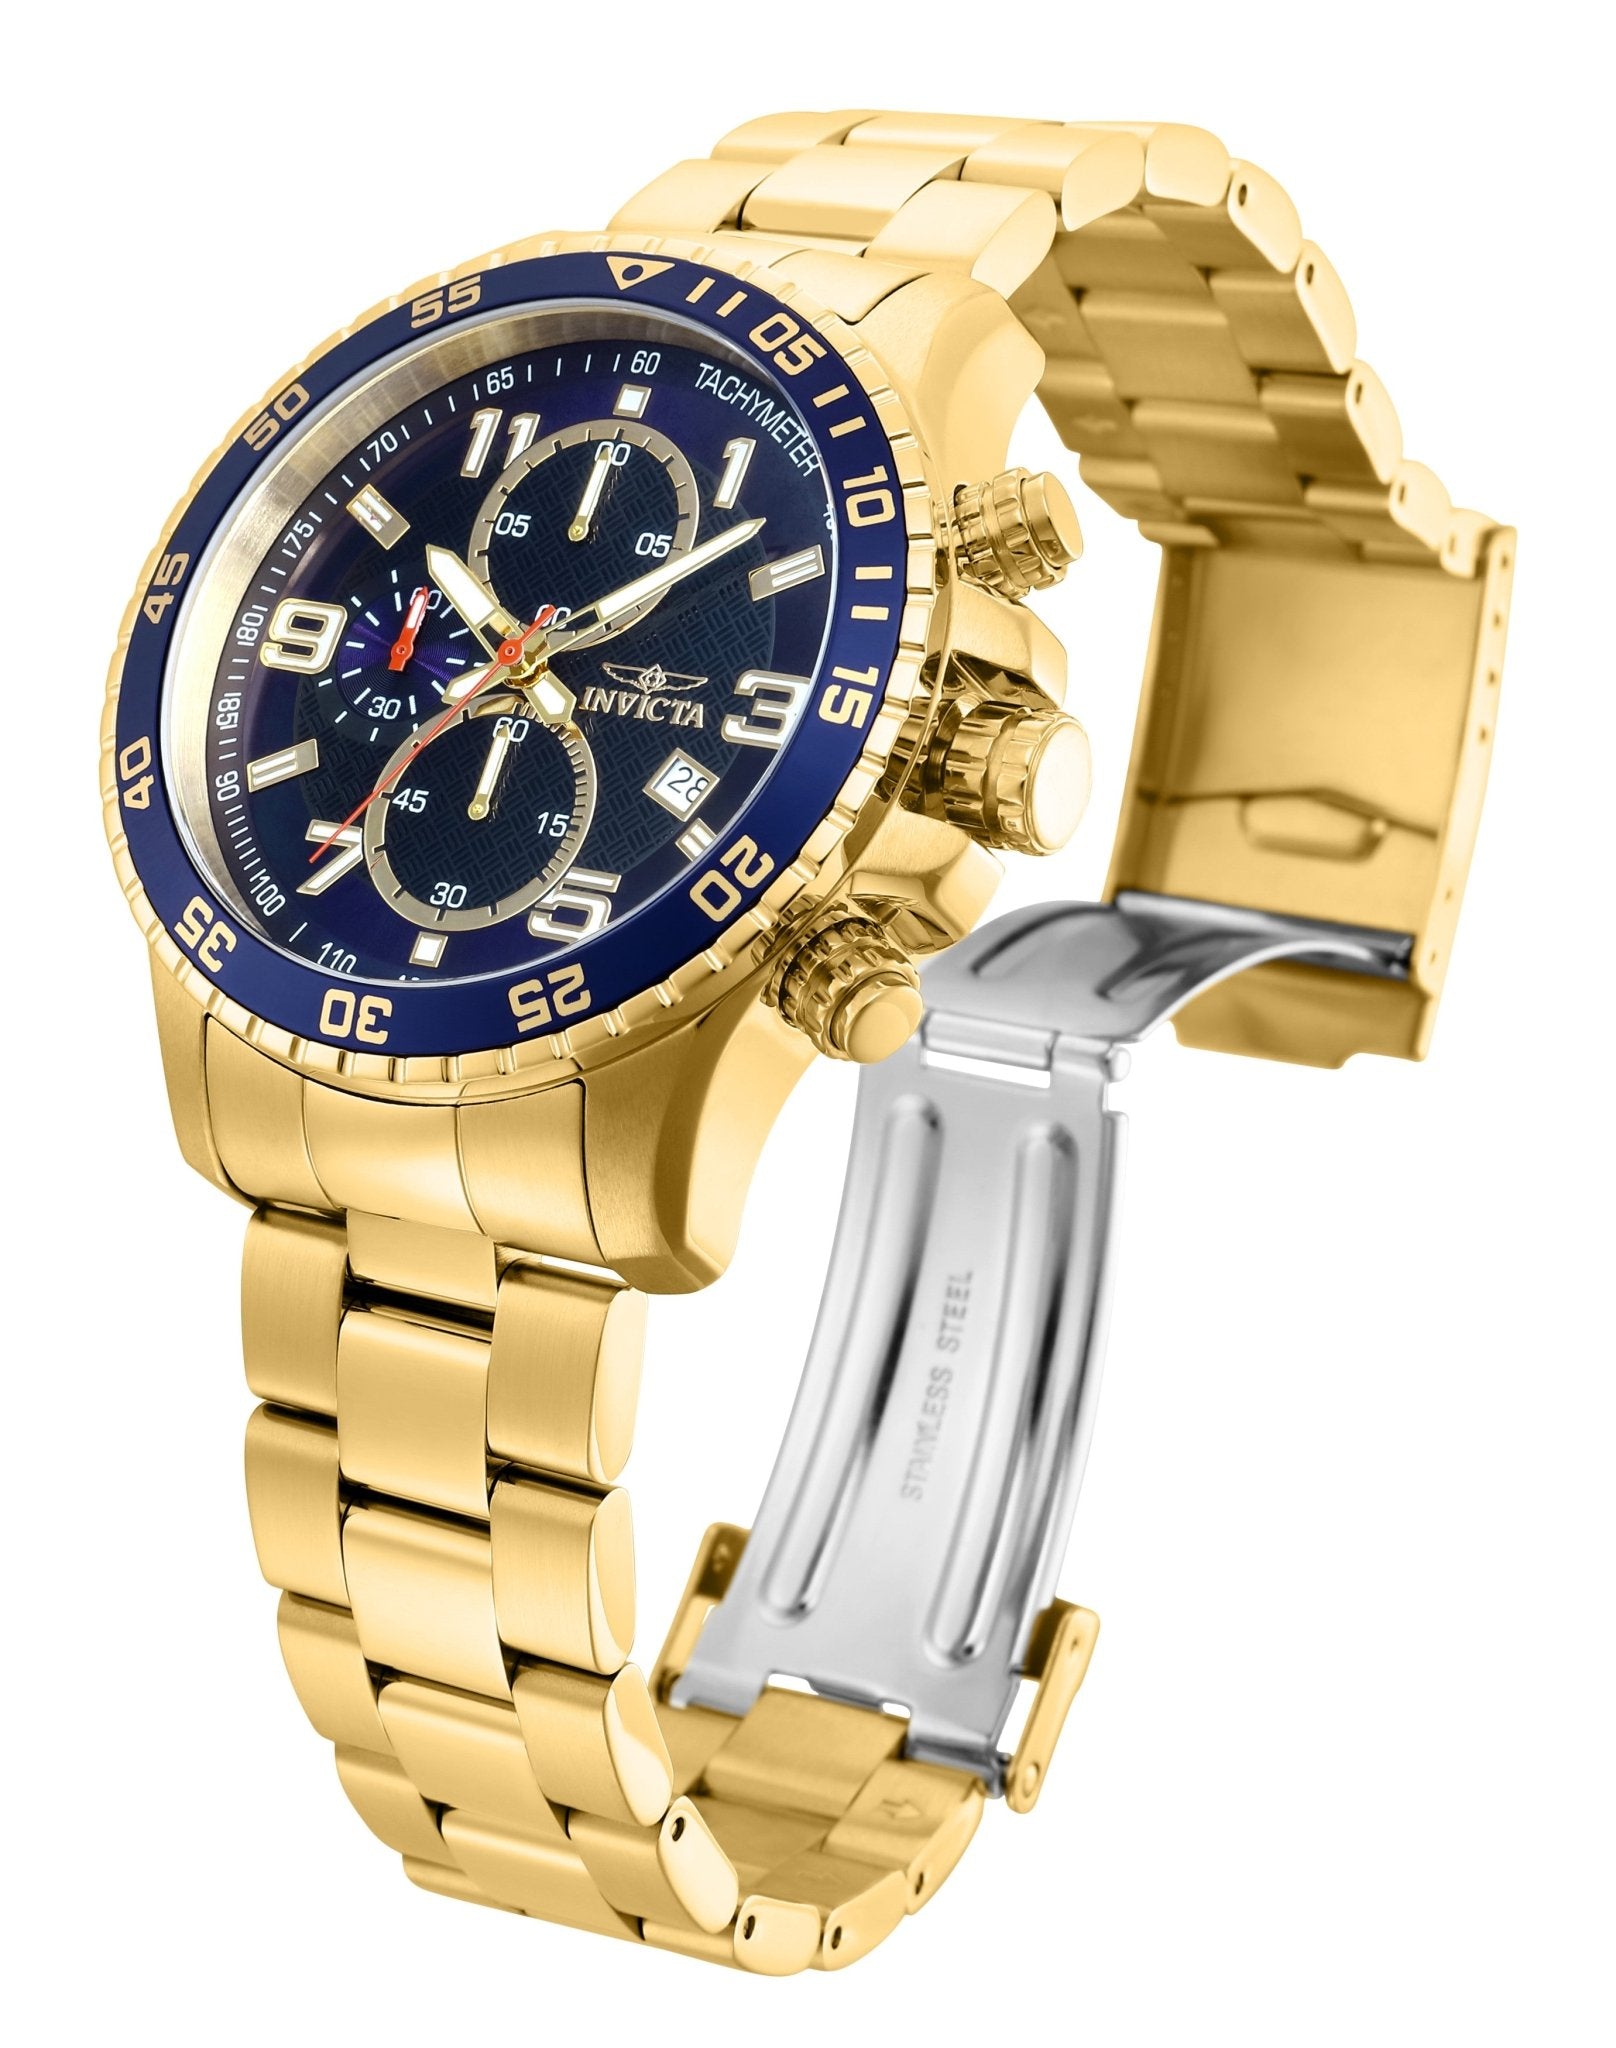 Side angled image of Invicta Specialty 14878 chronograph watch with gold accents and blue bezel